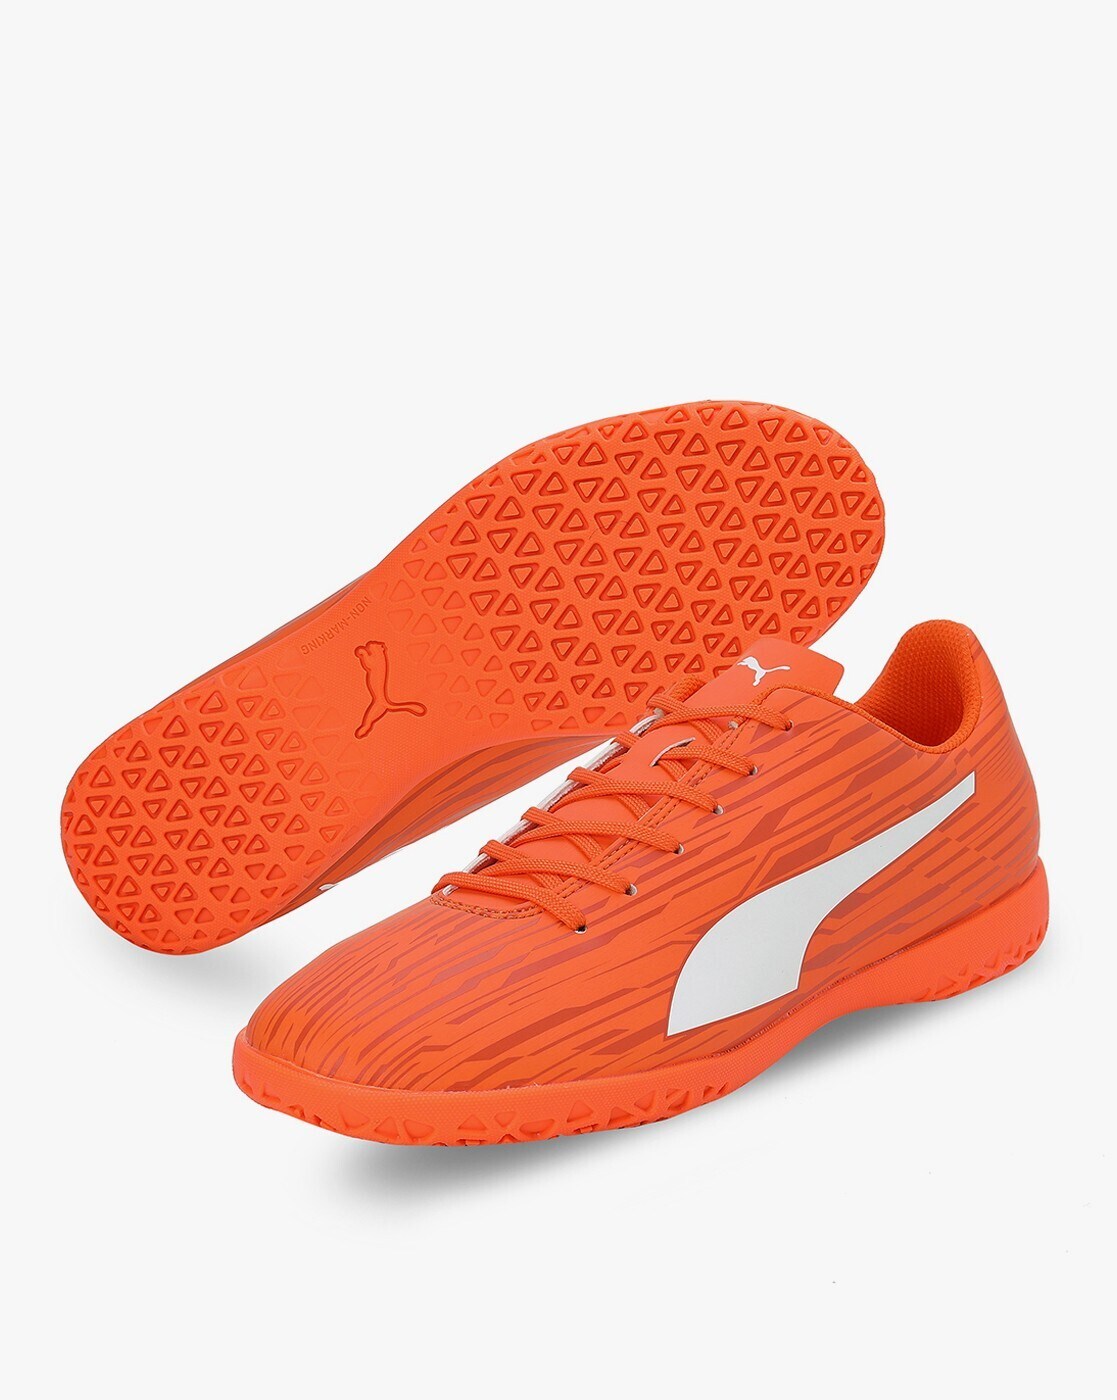 Buy TRP Just Now Shoes for Men's (Orange, Numeric_7) at